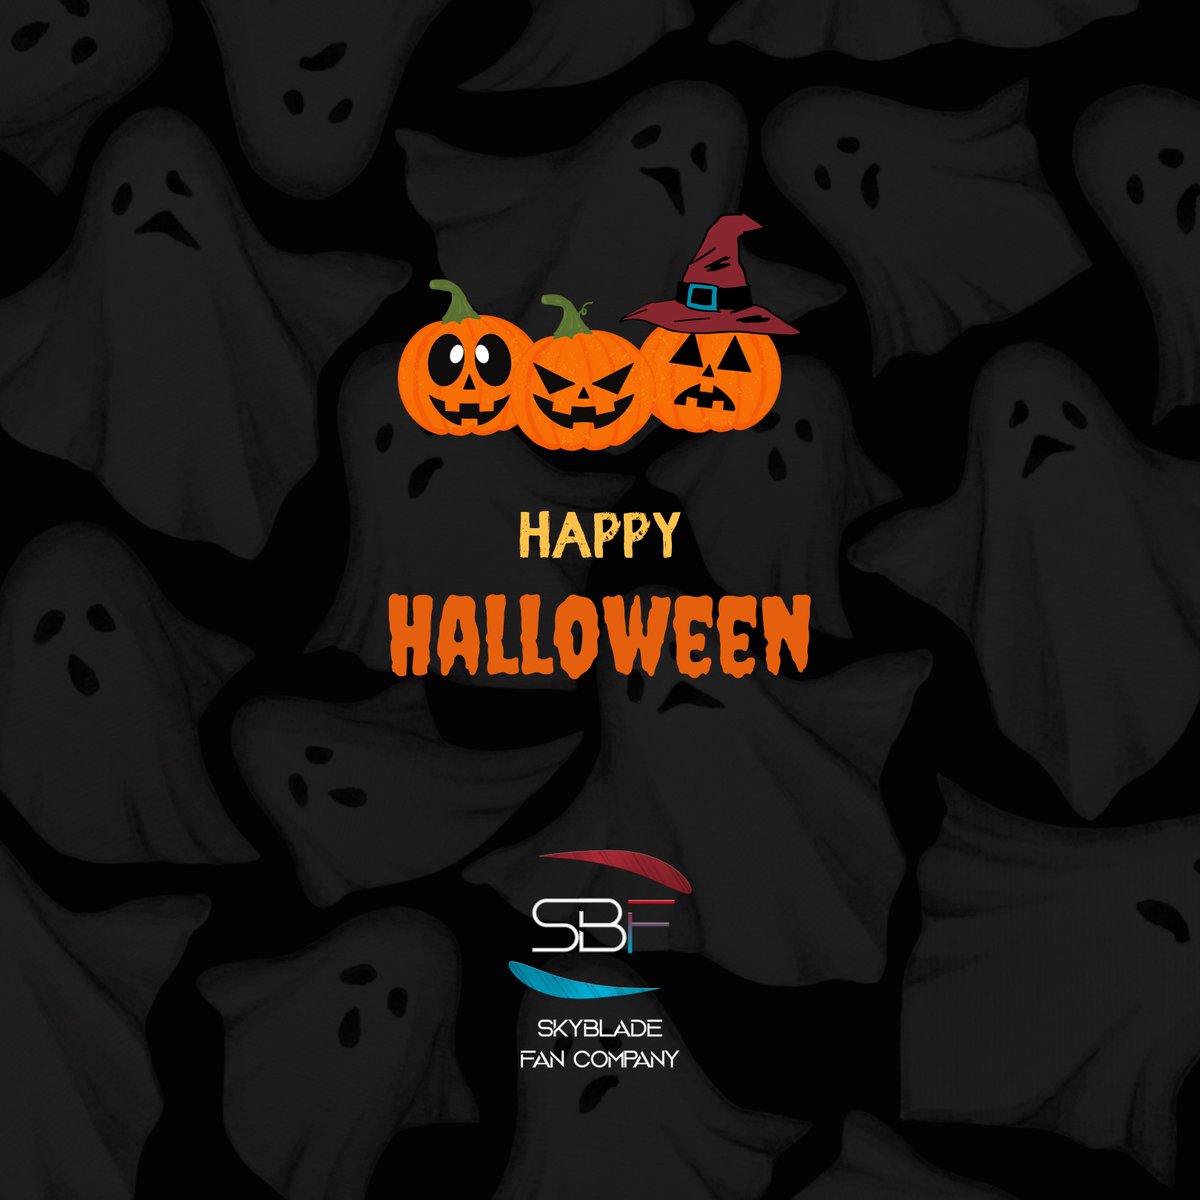 Happy Halloween! Don't get tricked into paying more for your HVLS fans. SkyBlade provides a high-quality product at a lower price than competitors!